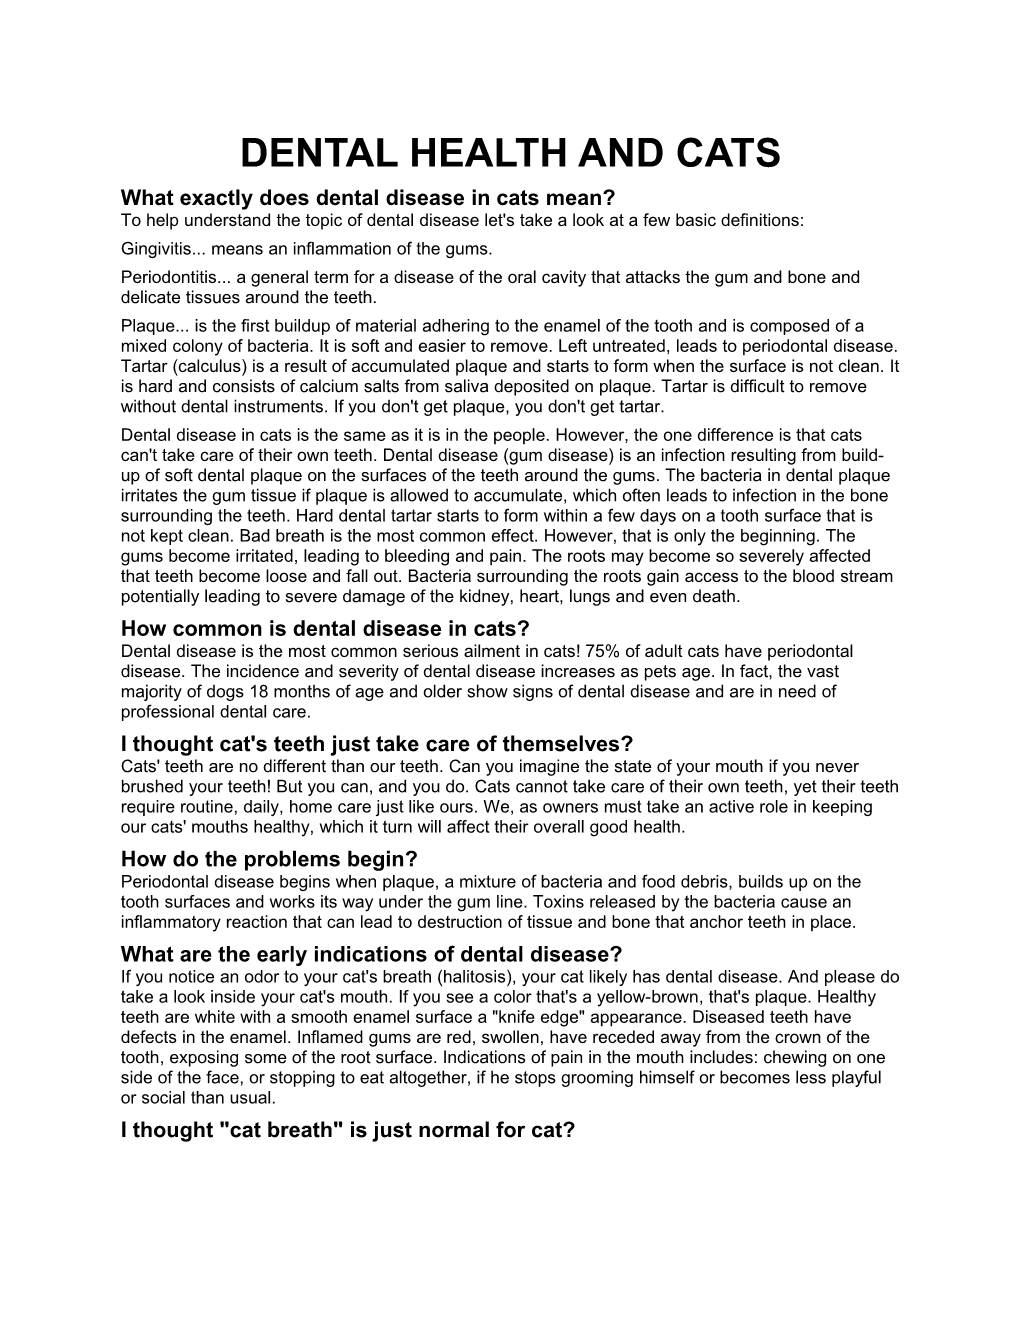 What Exactly Does Dental Disease in Cats Mean?